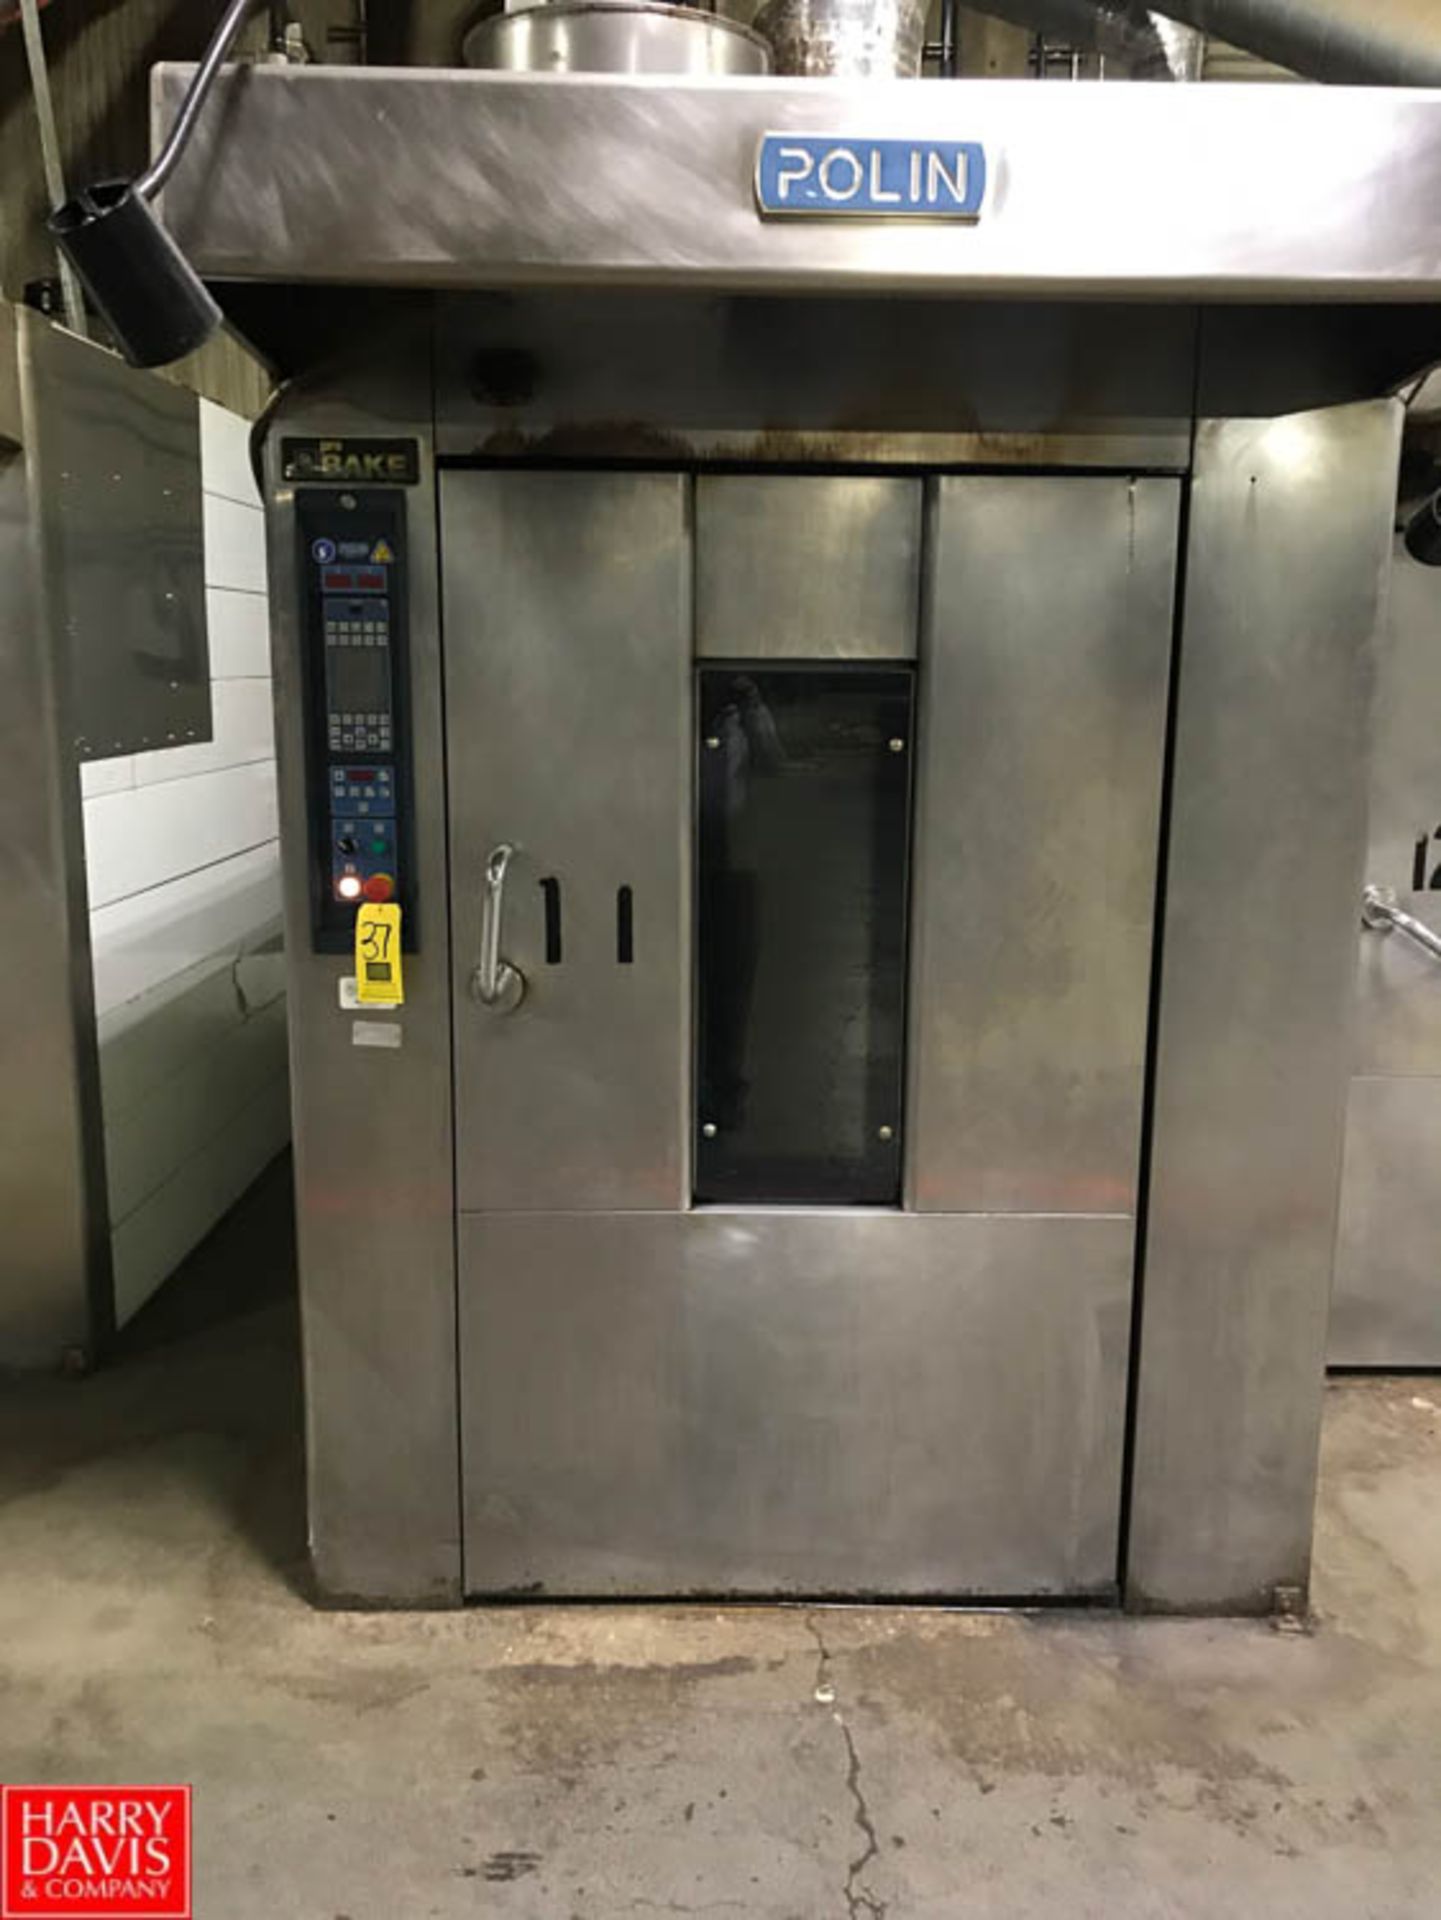 2008 Polin ROTO AVANT Double Rack Rotating Gas-Fired Oven, Model: ROTO 8095'200 SC, S/N: A804192/